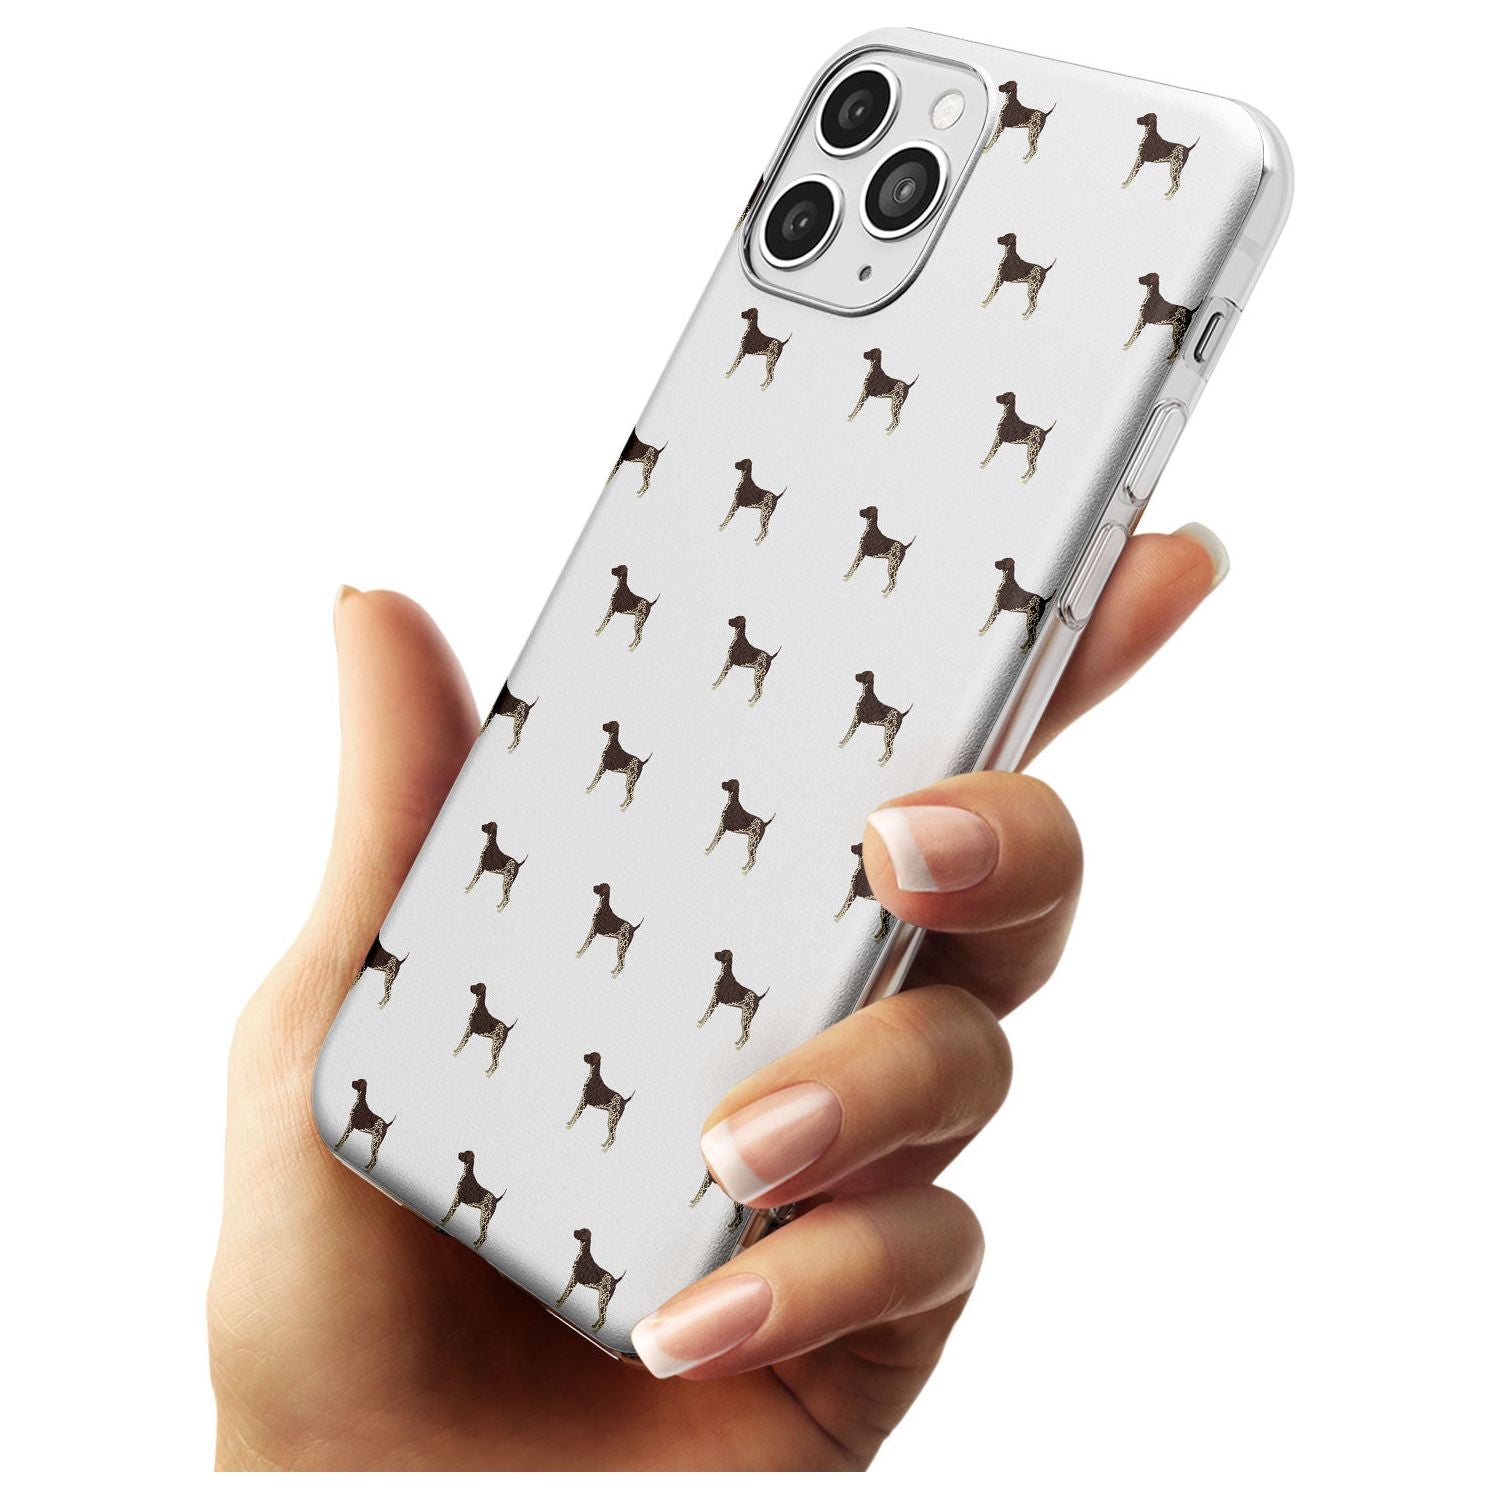 German Shorthaired Pointer Dog Pattern Slim TPU Phone Case for iPhone 11 Pro Max